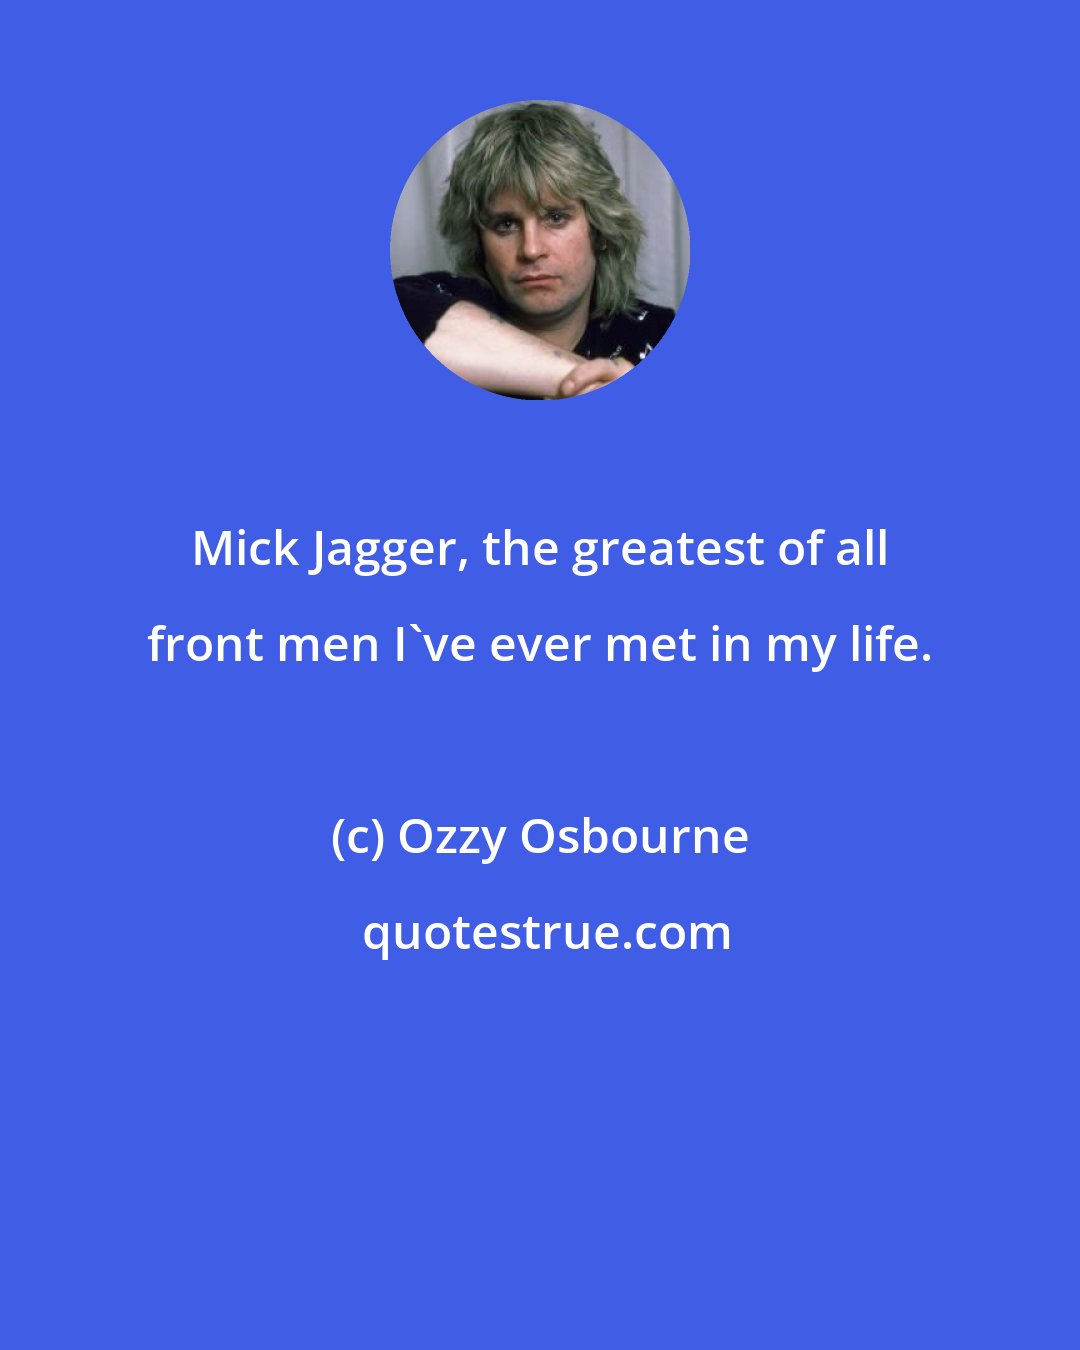 Ozzy Osbourne: Mick Jagger, the greatest of all front men I've ever met in my life.